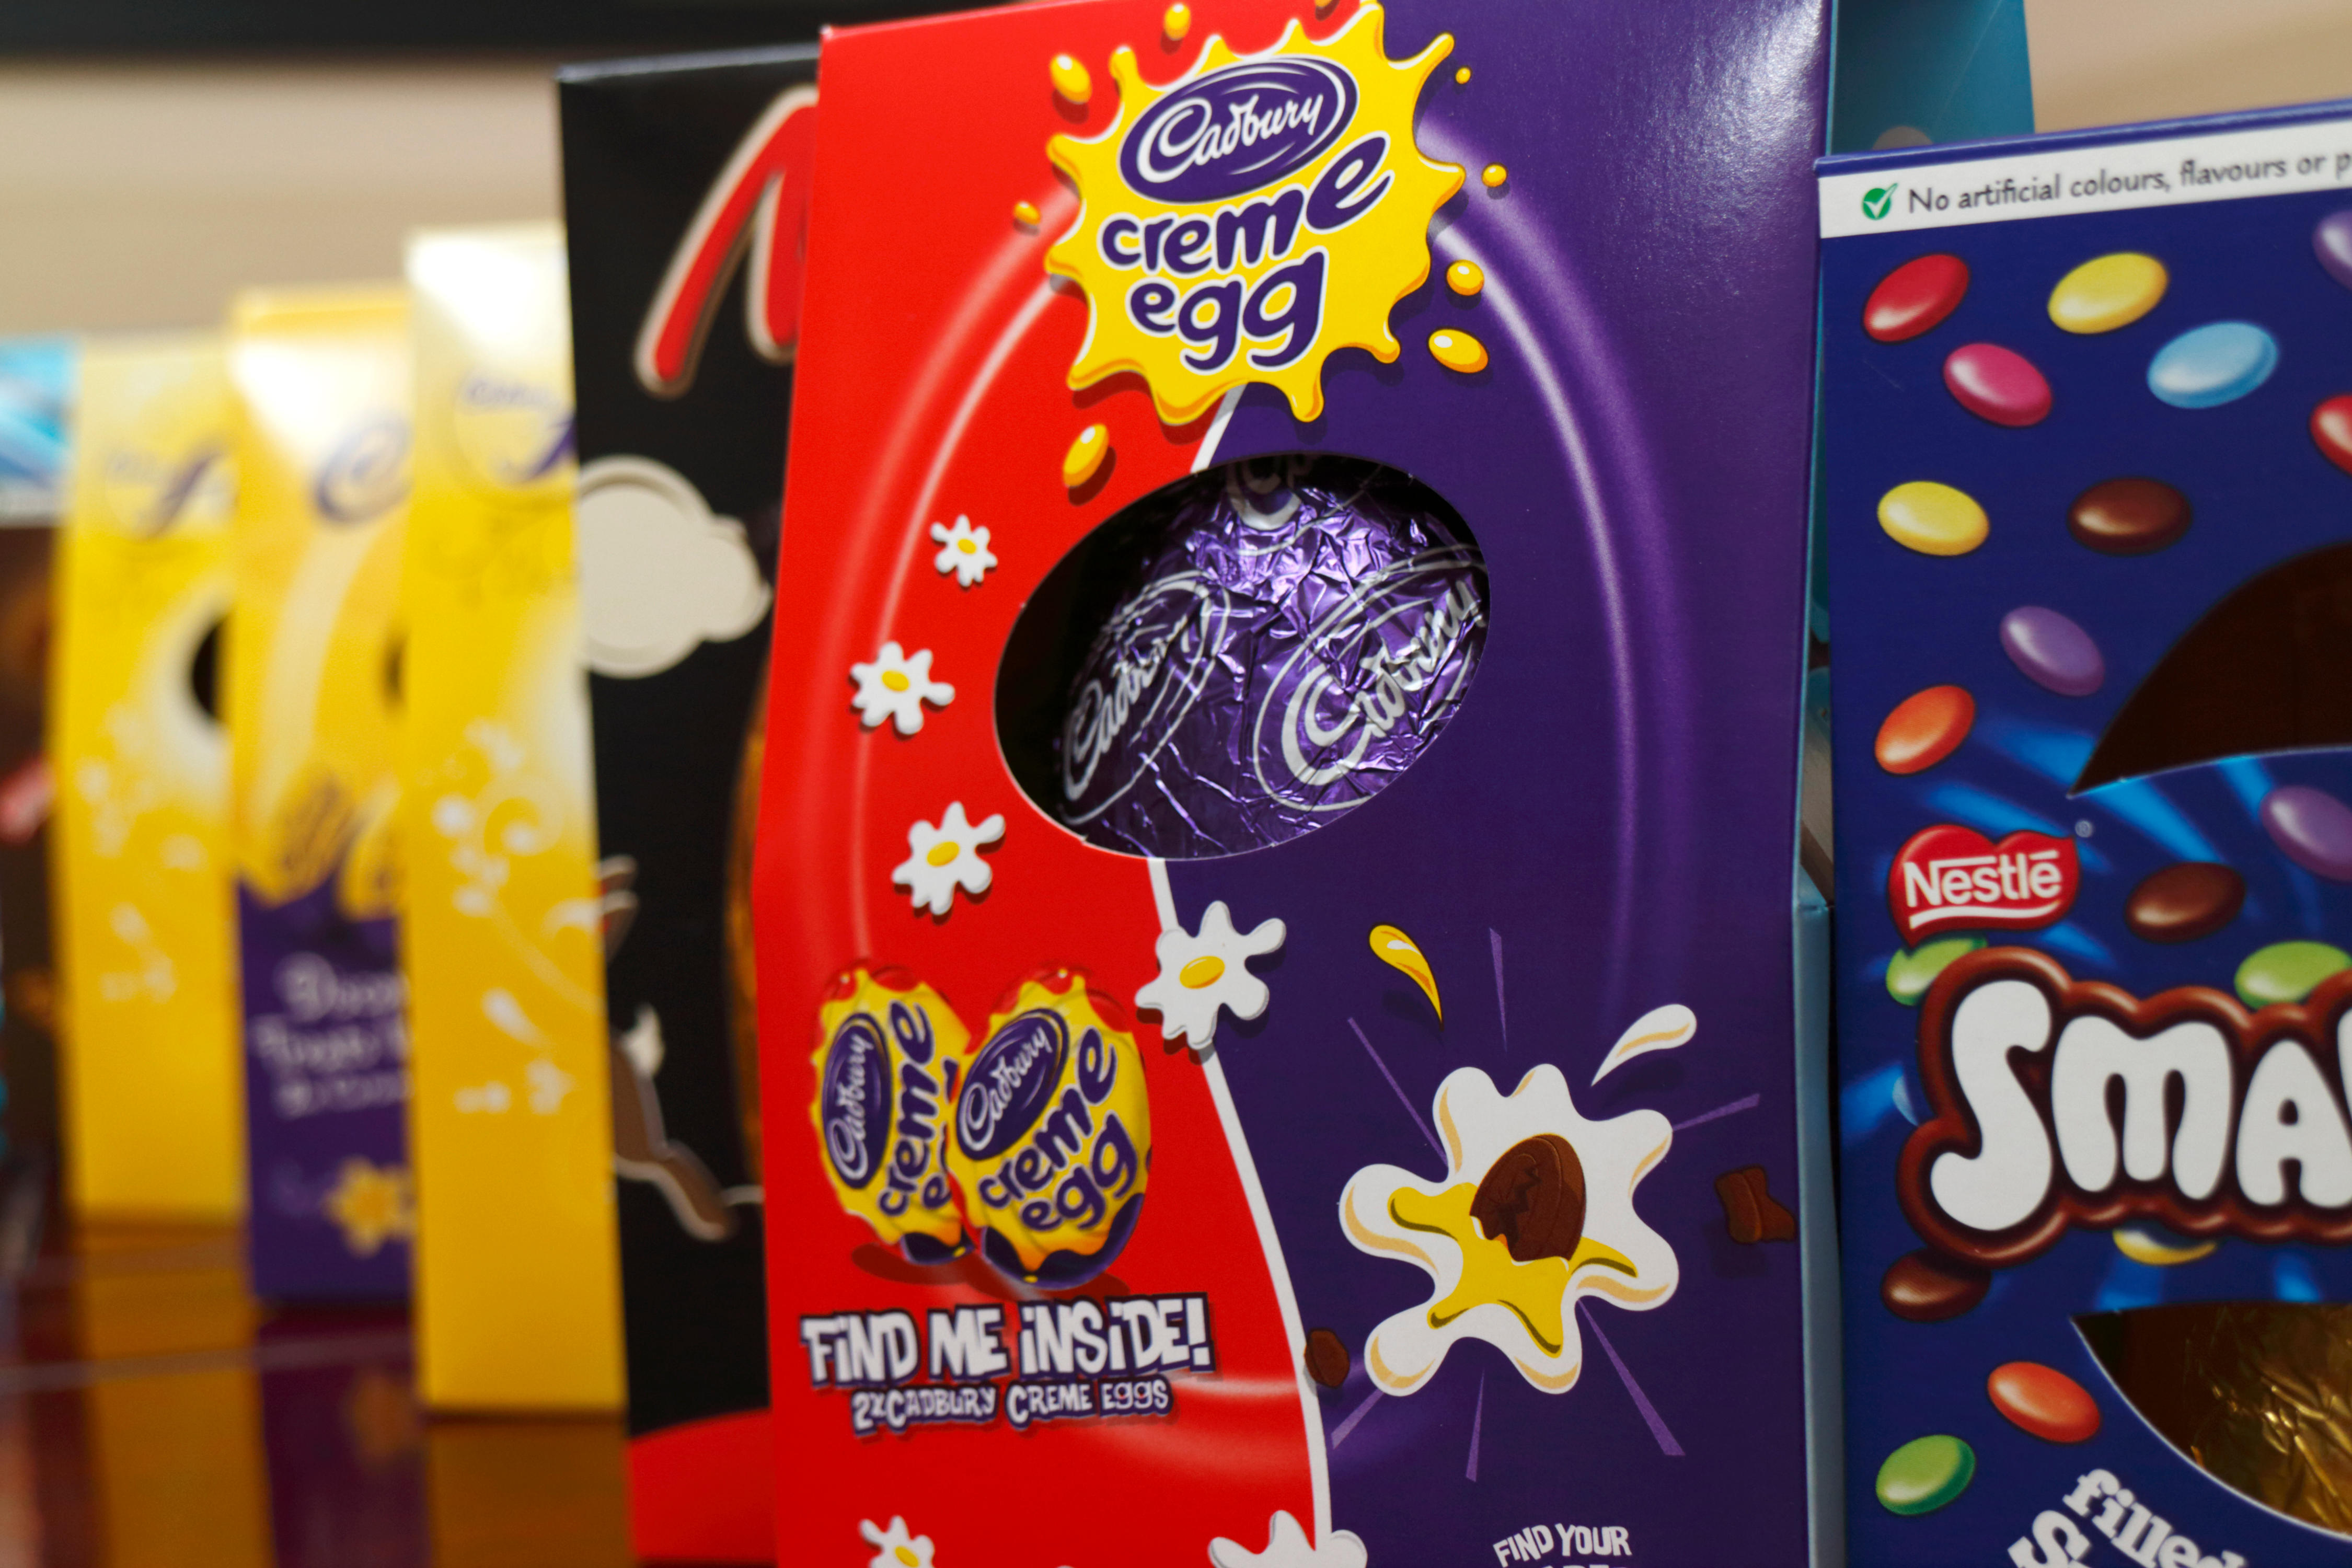 Sainsbury's shoppers will be able to pick up large Cadbury Easter eggs for just £2 from next week